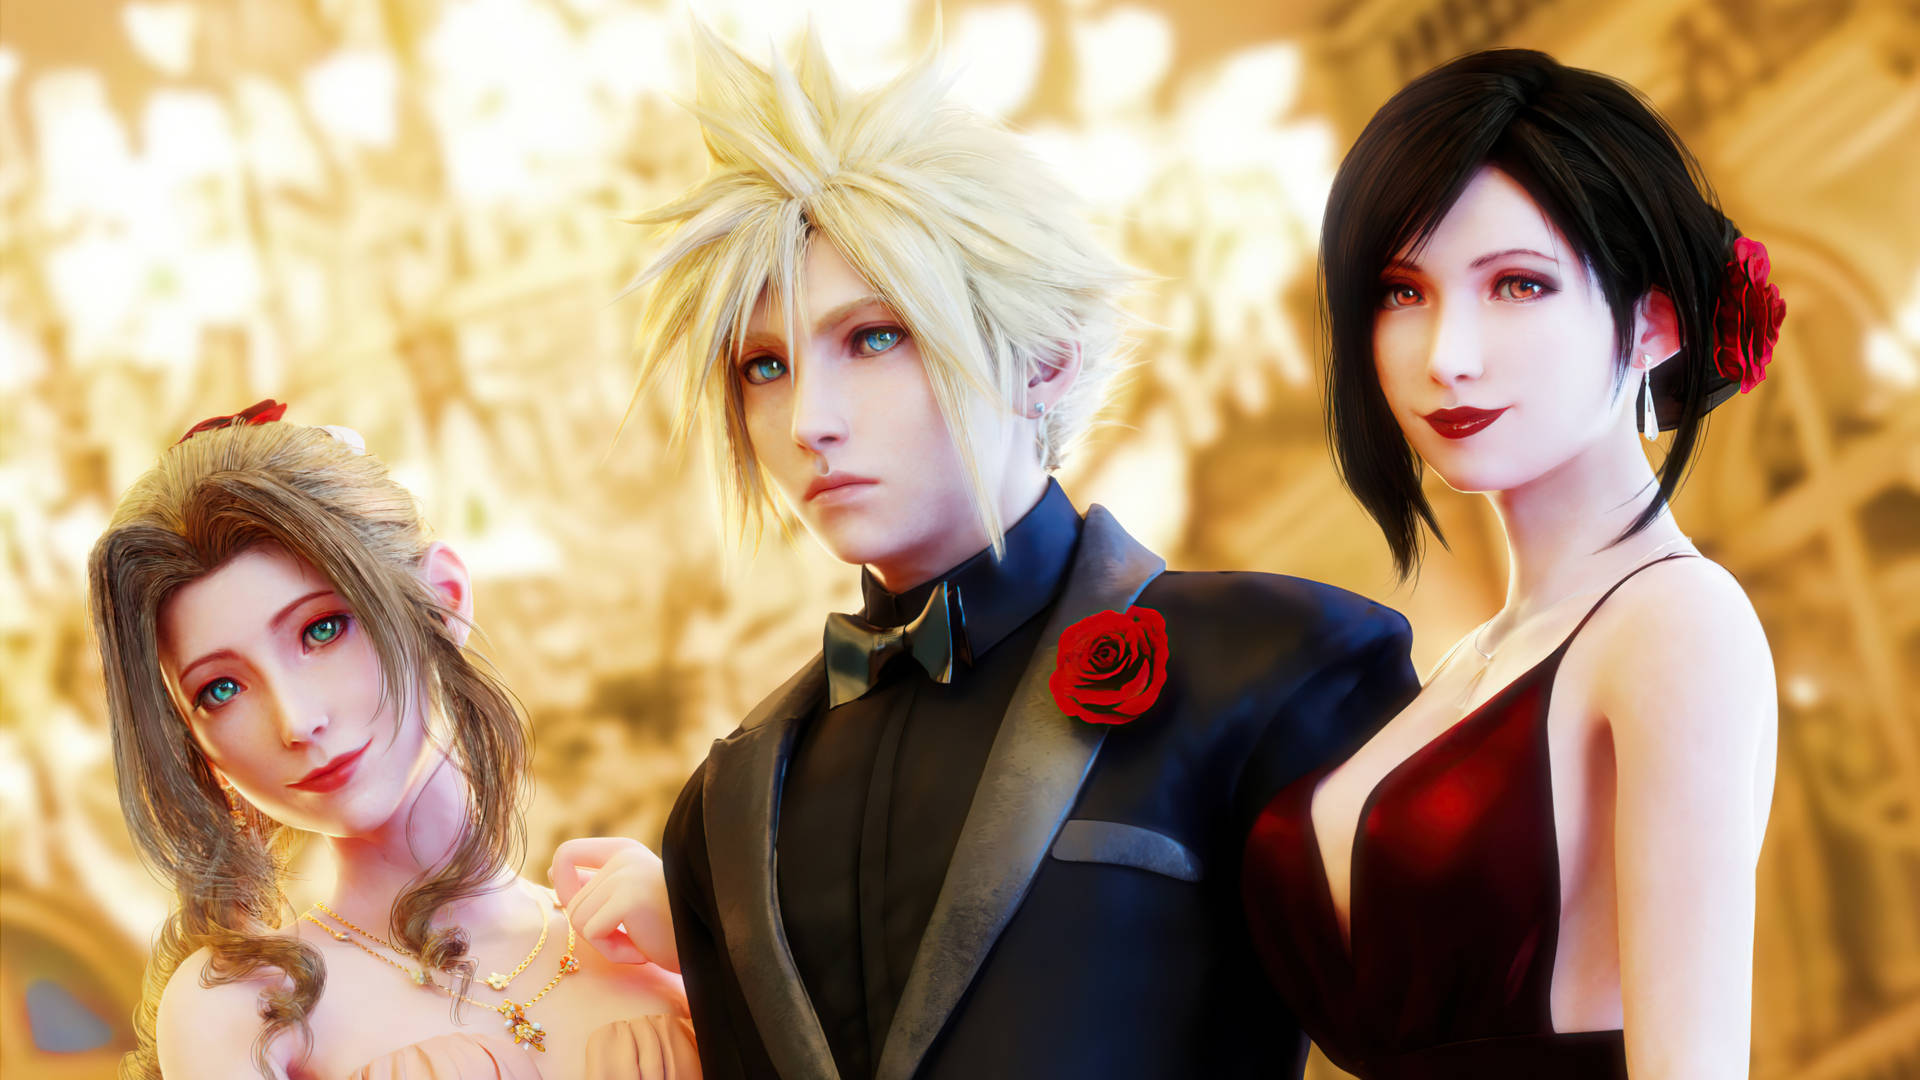 Final Fantasy 7 Formal Outfits Background